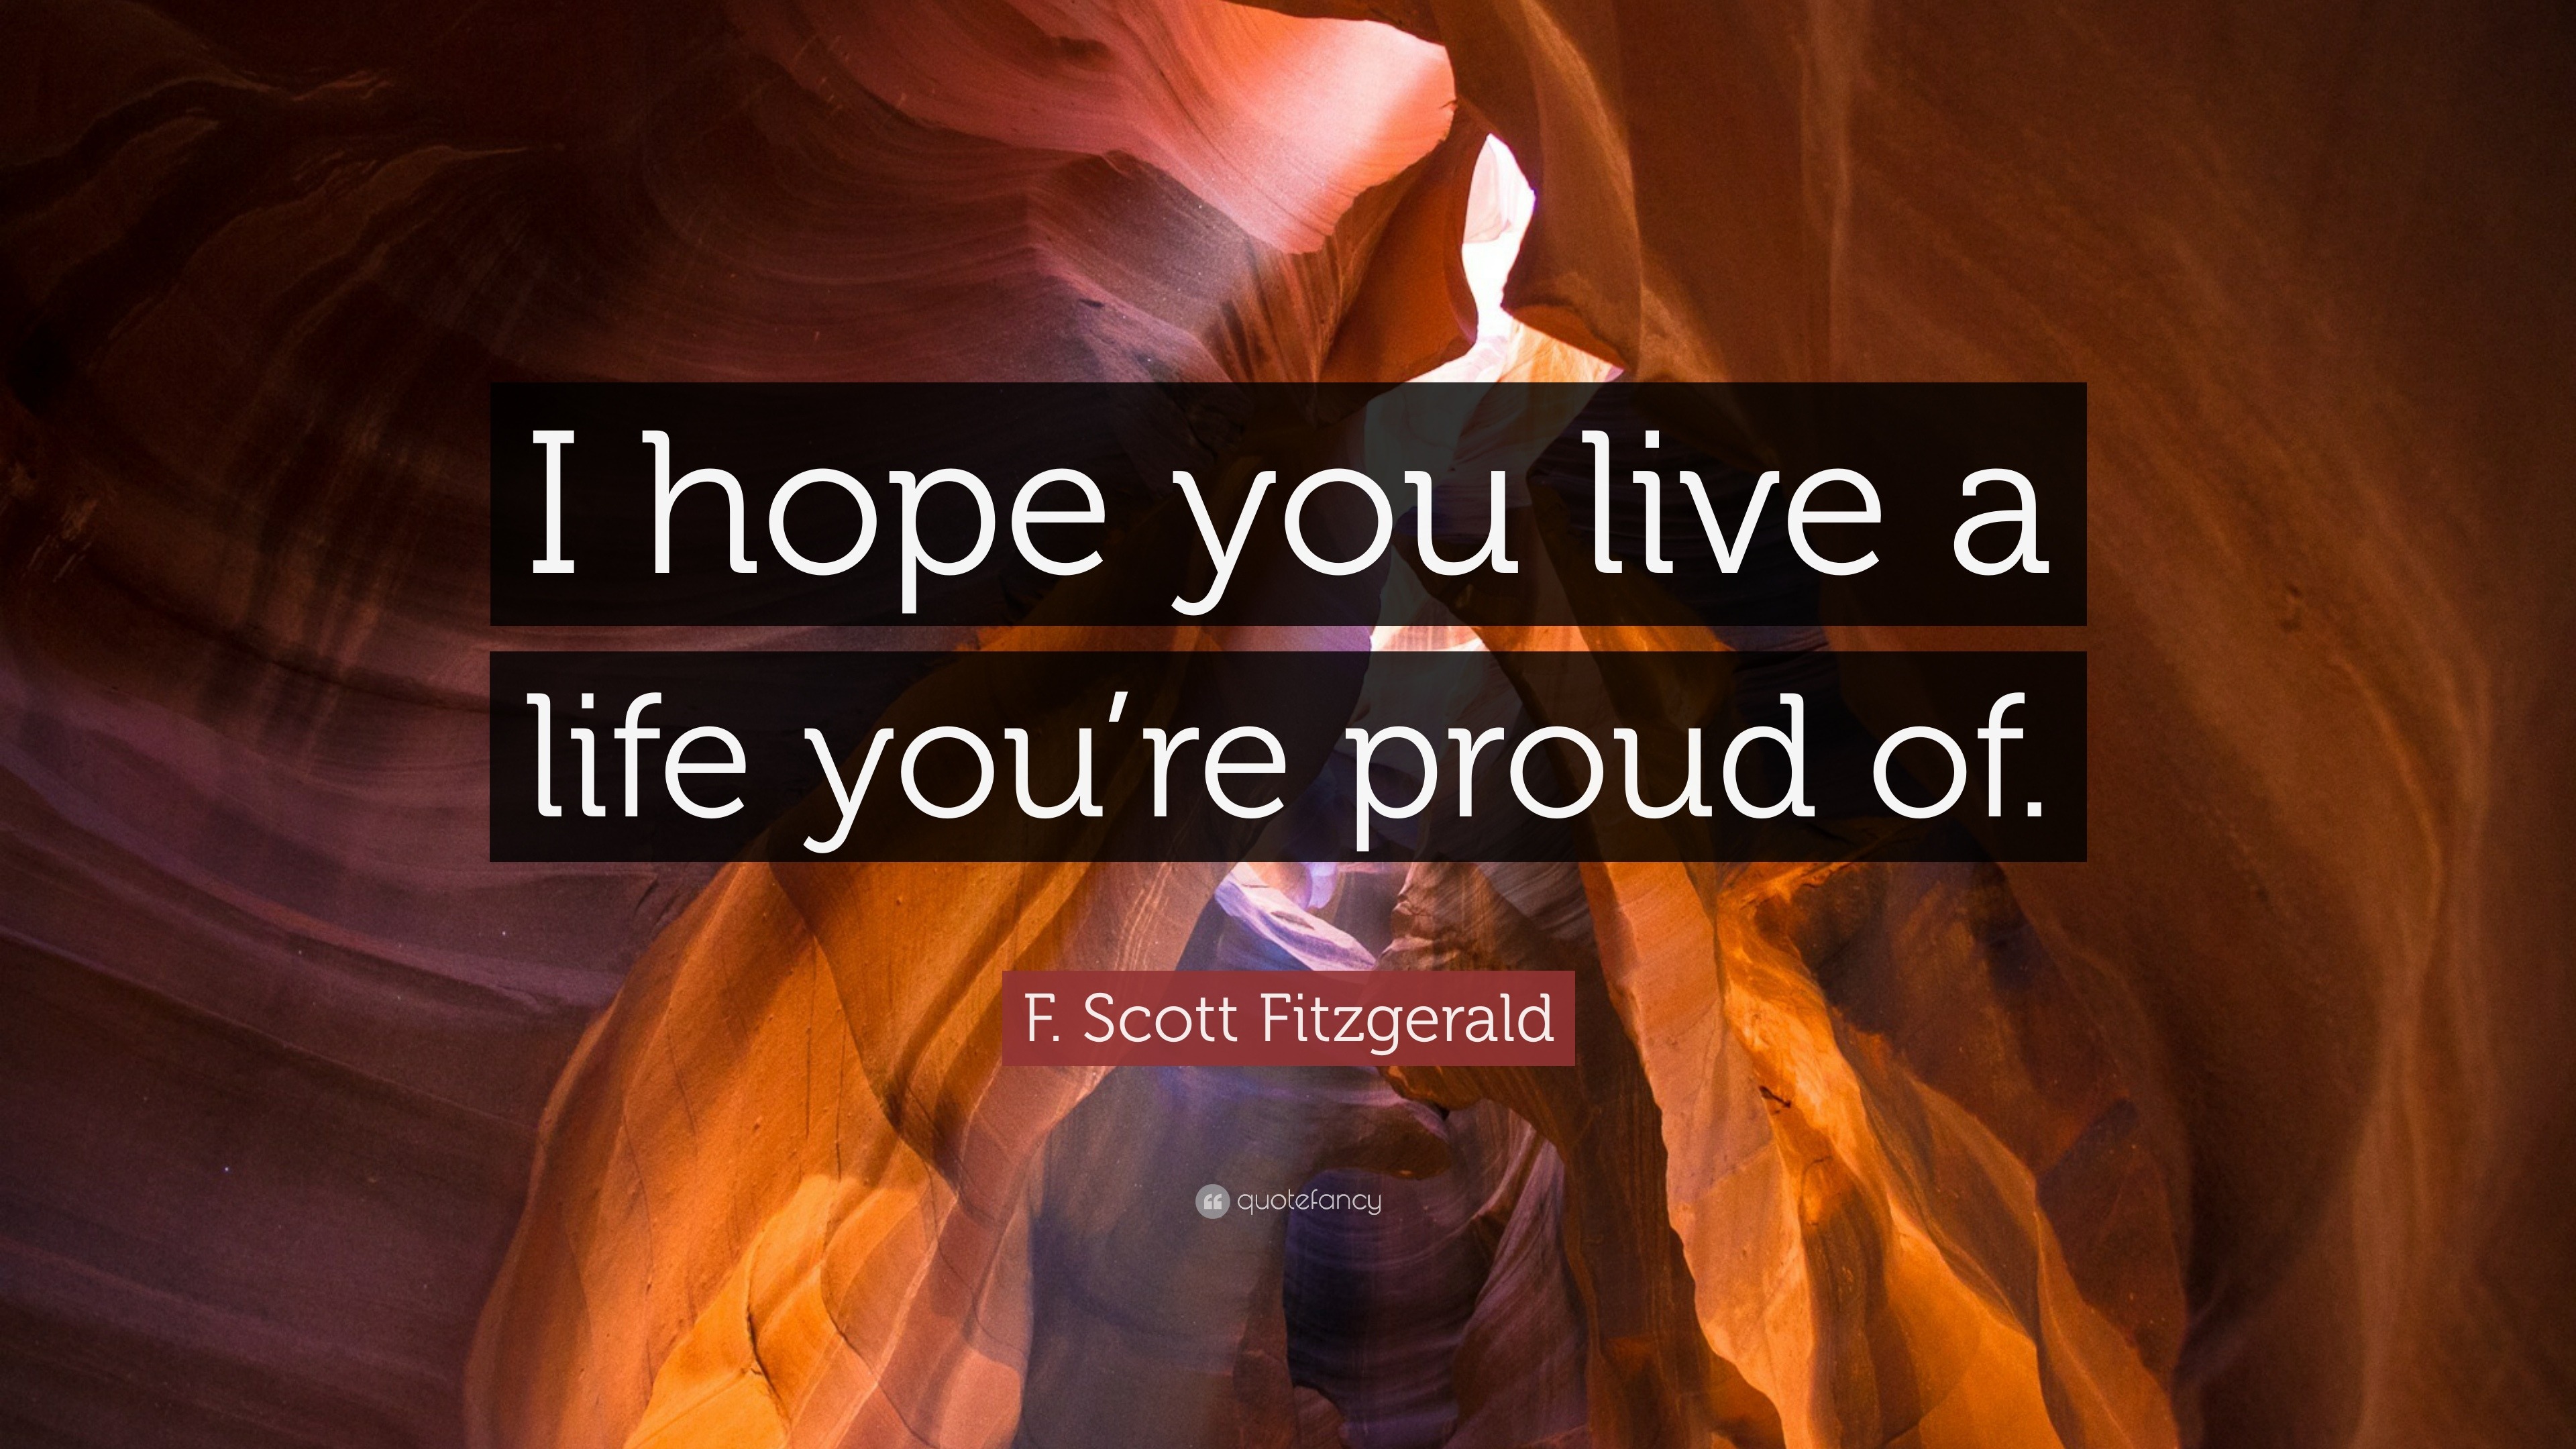 F. Scott Fitzgerald Quote: “I hope you live a life you’re proud of.”